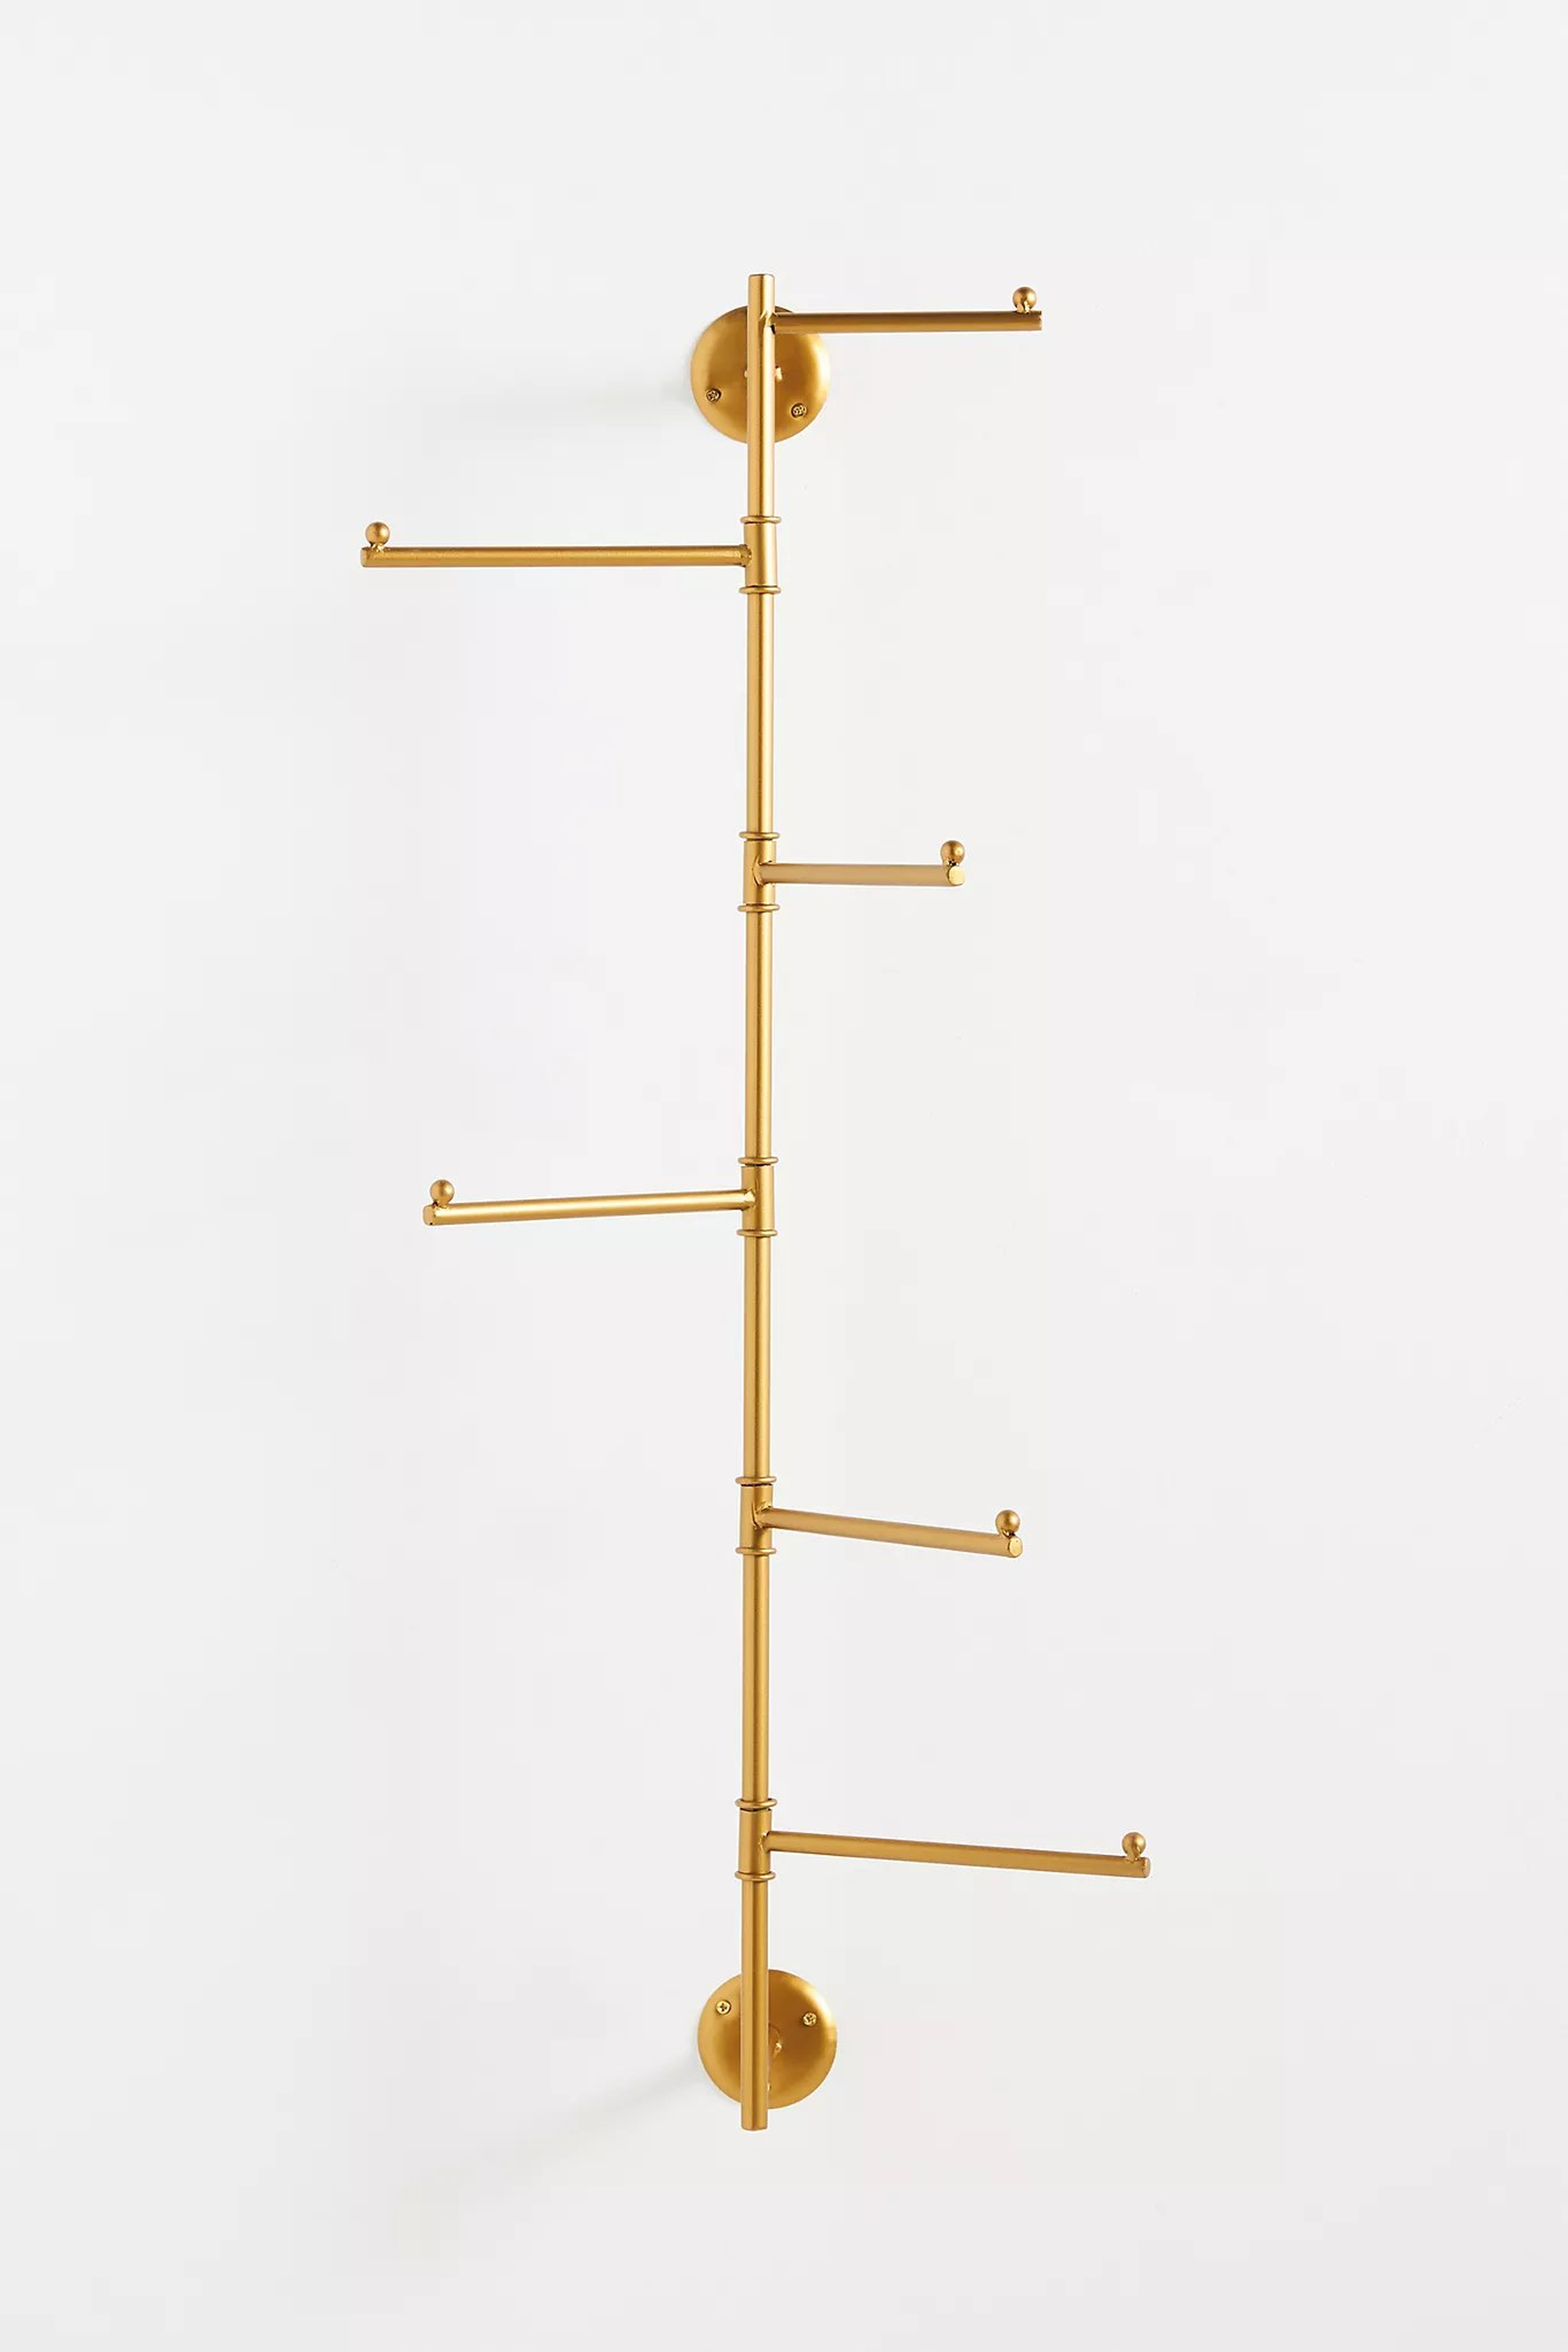 Swivel Hanging Rack By Anthropologie in Red - Anthropologie